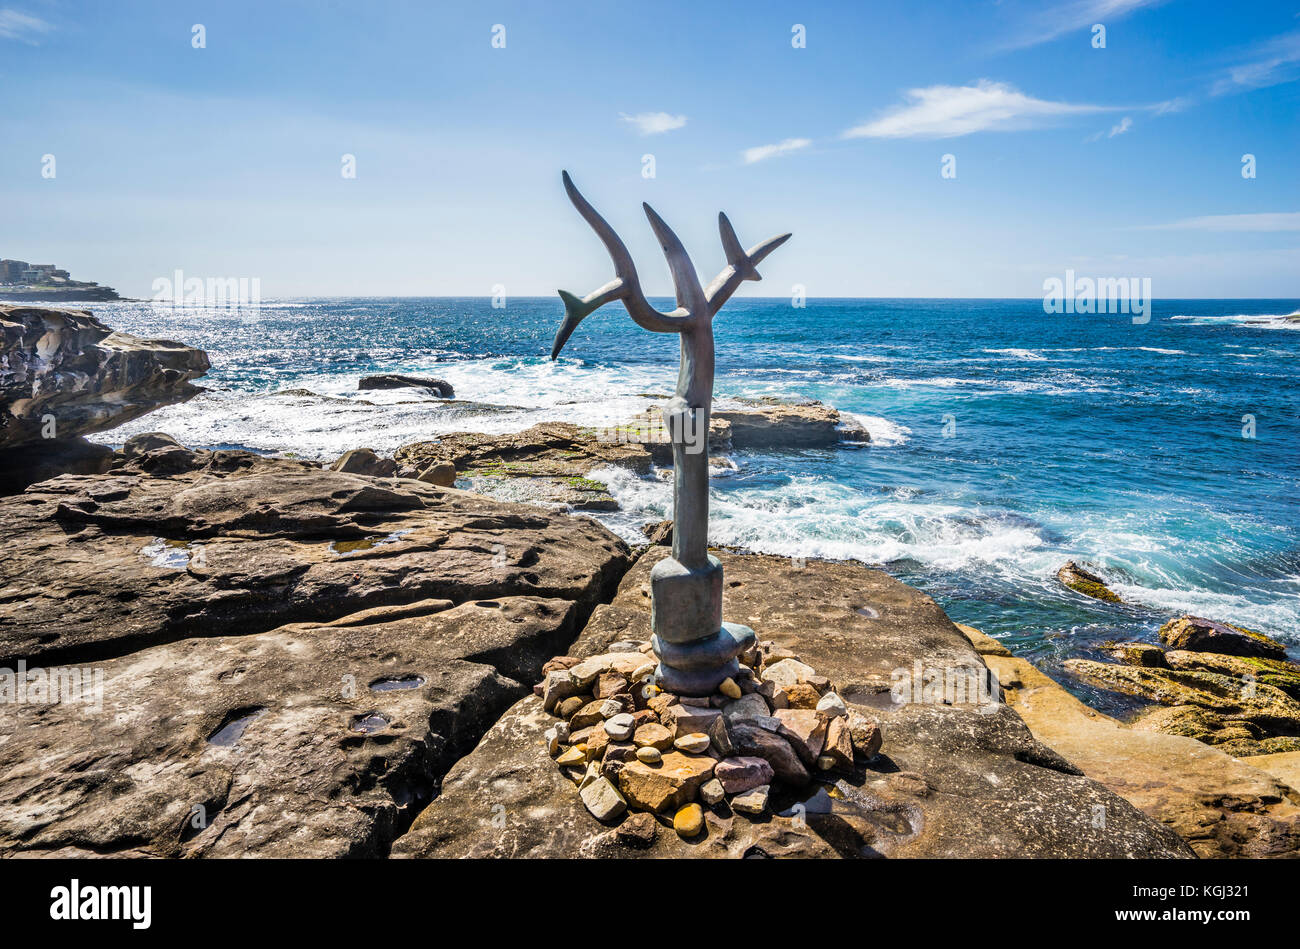 Sculpture by the sea 2017, annual exhibition on the coastal walk between Bondi and Tamara Beach, Sydney, New South Wales, Australia. Bronce sculpture  Stock Photo